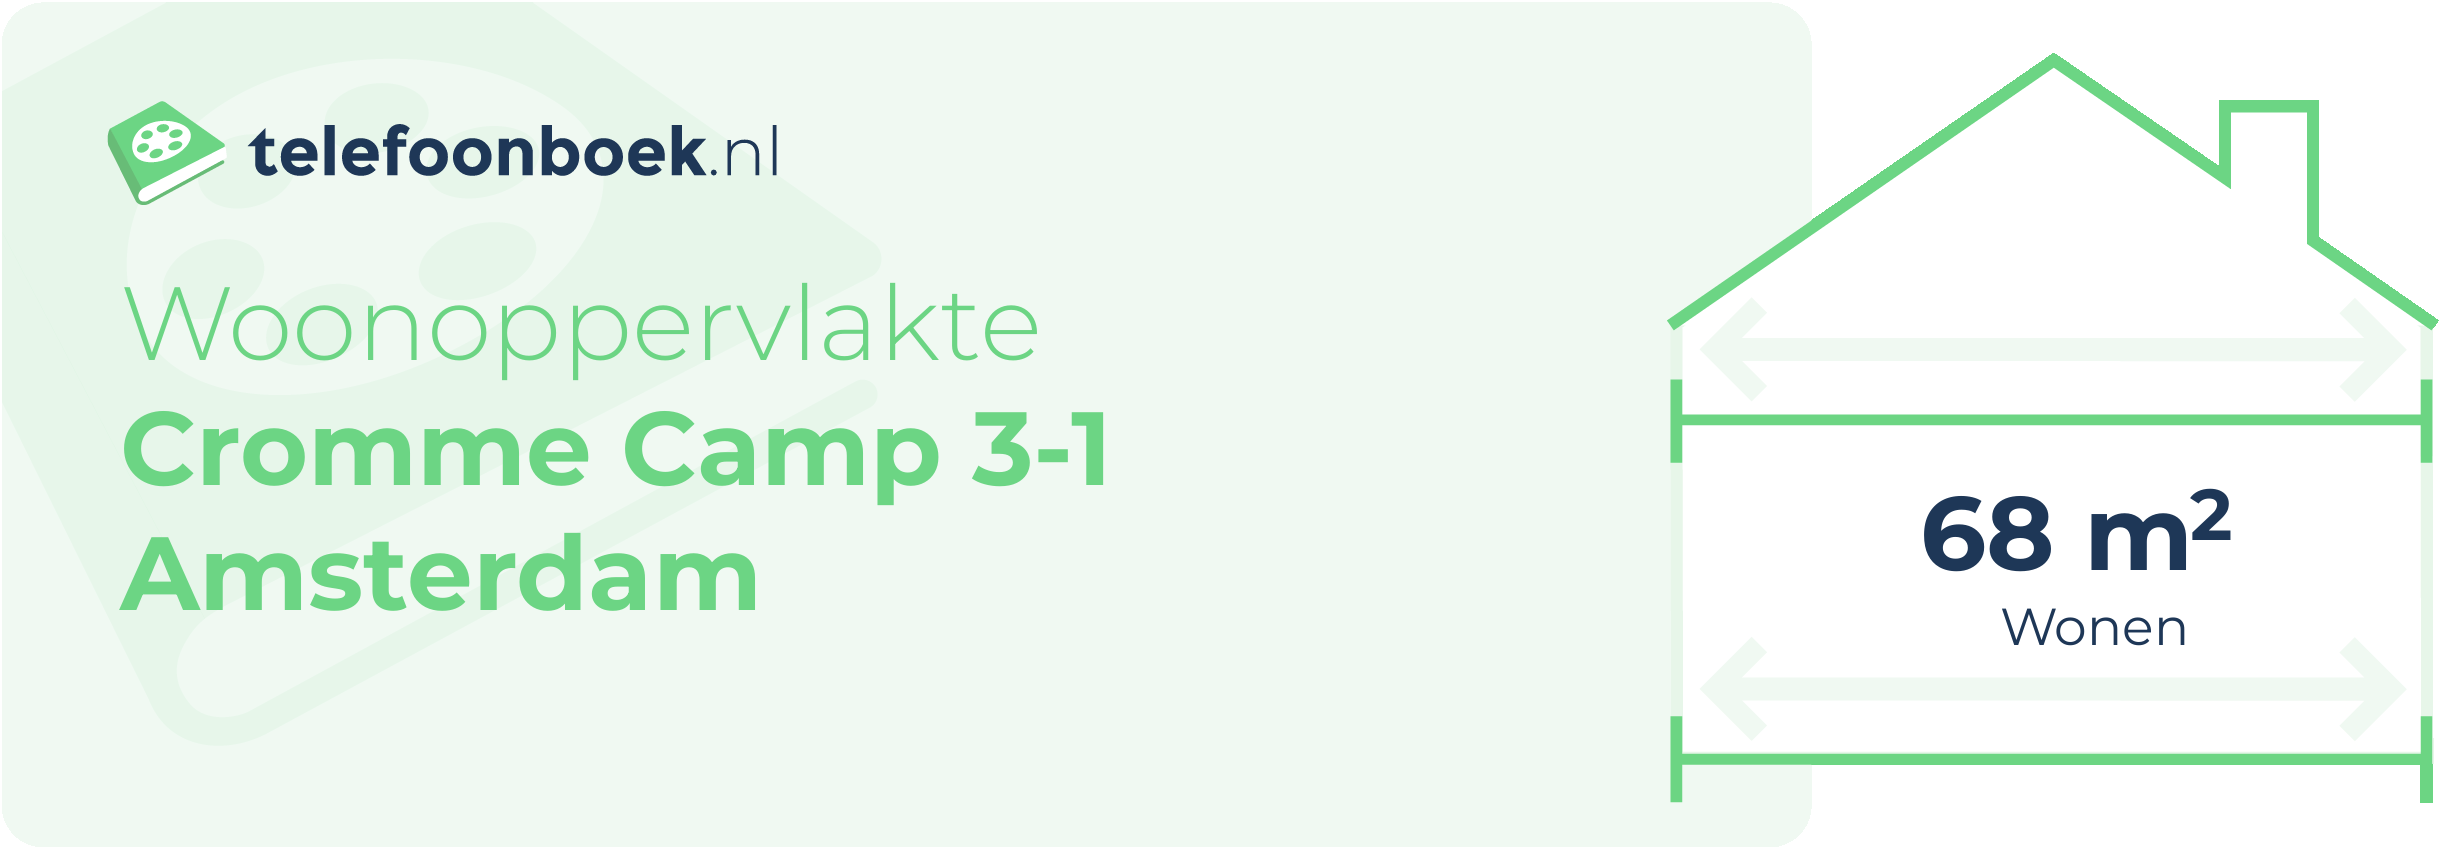 Woonoppervlakte Cromme Camp 3-1 Amsterdam